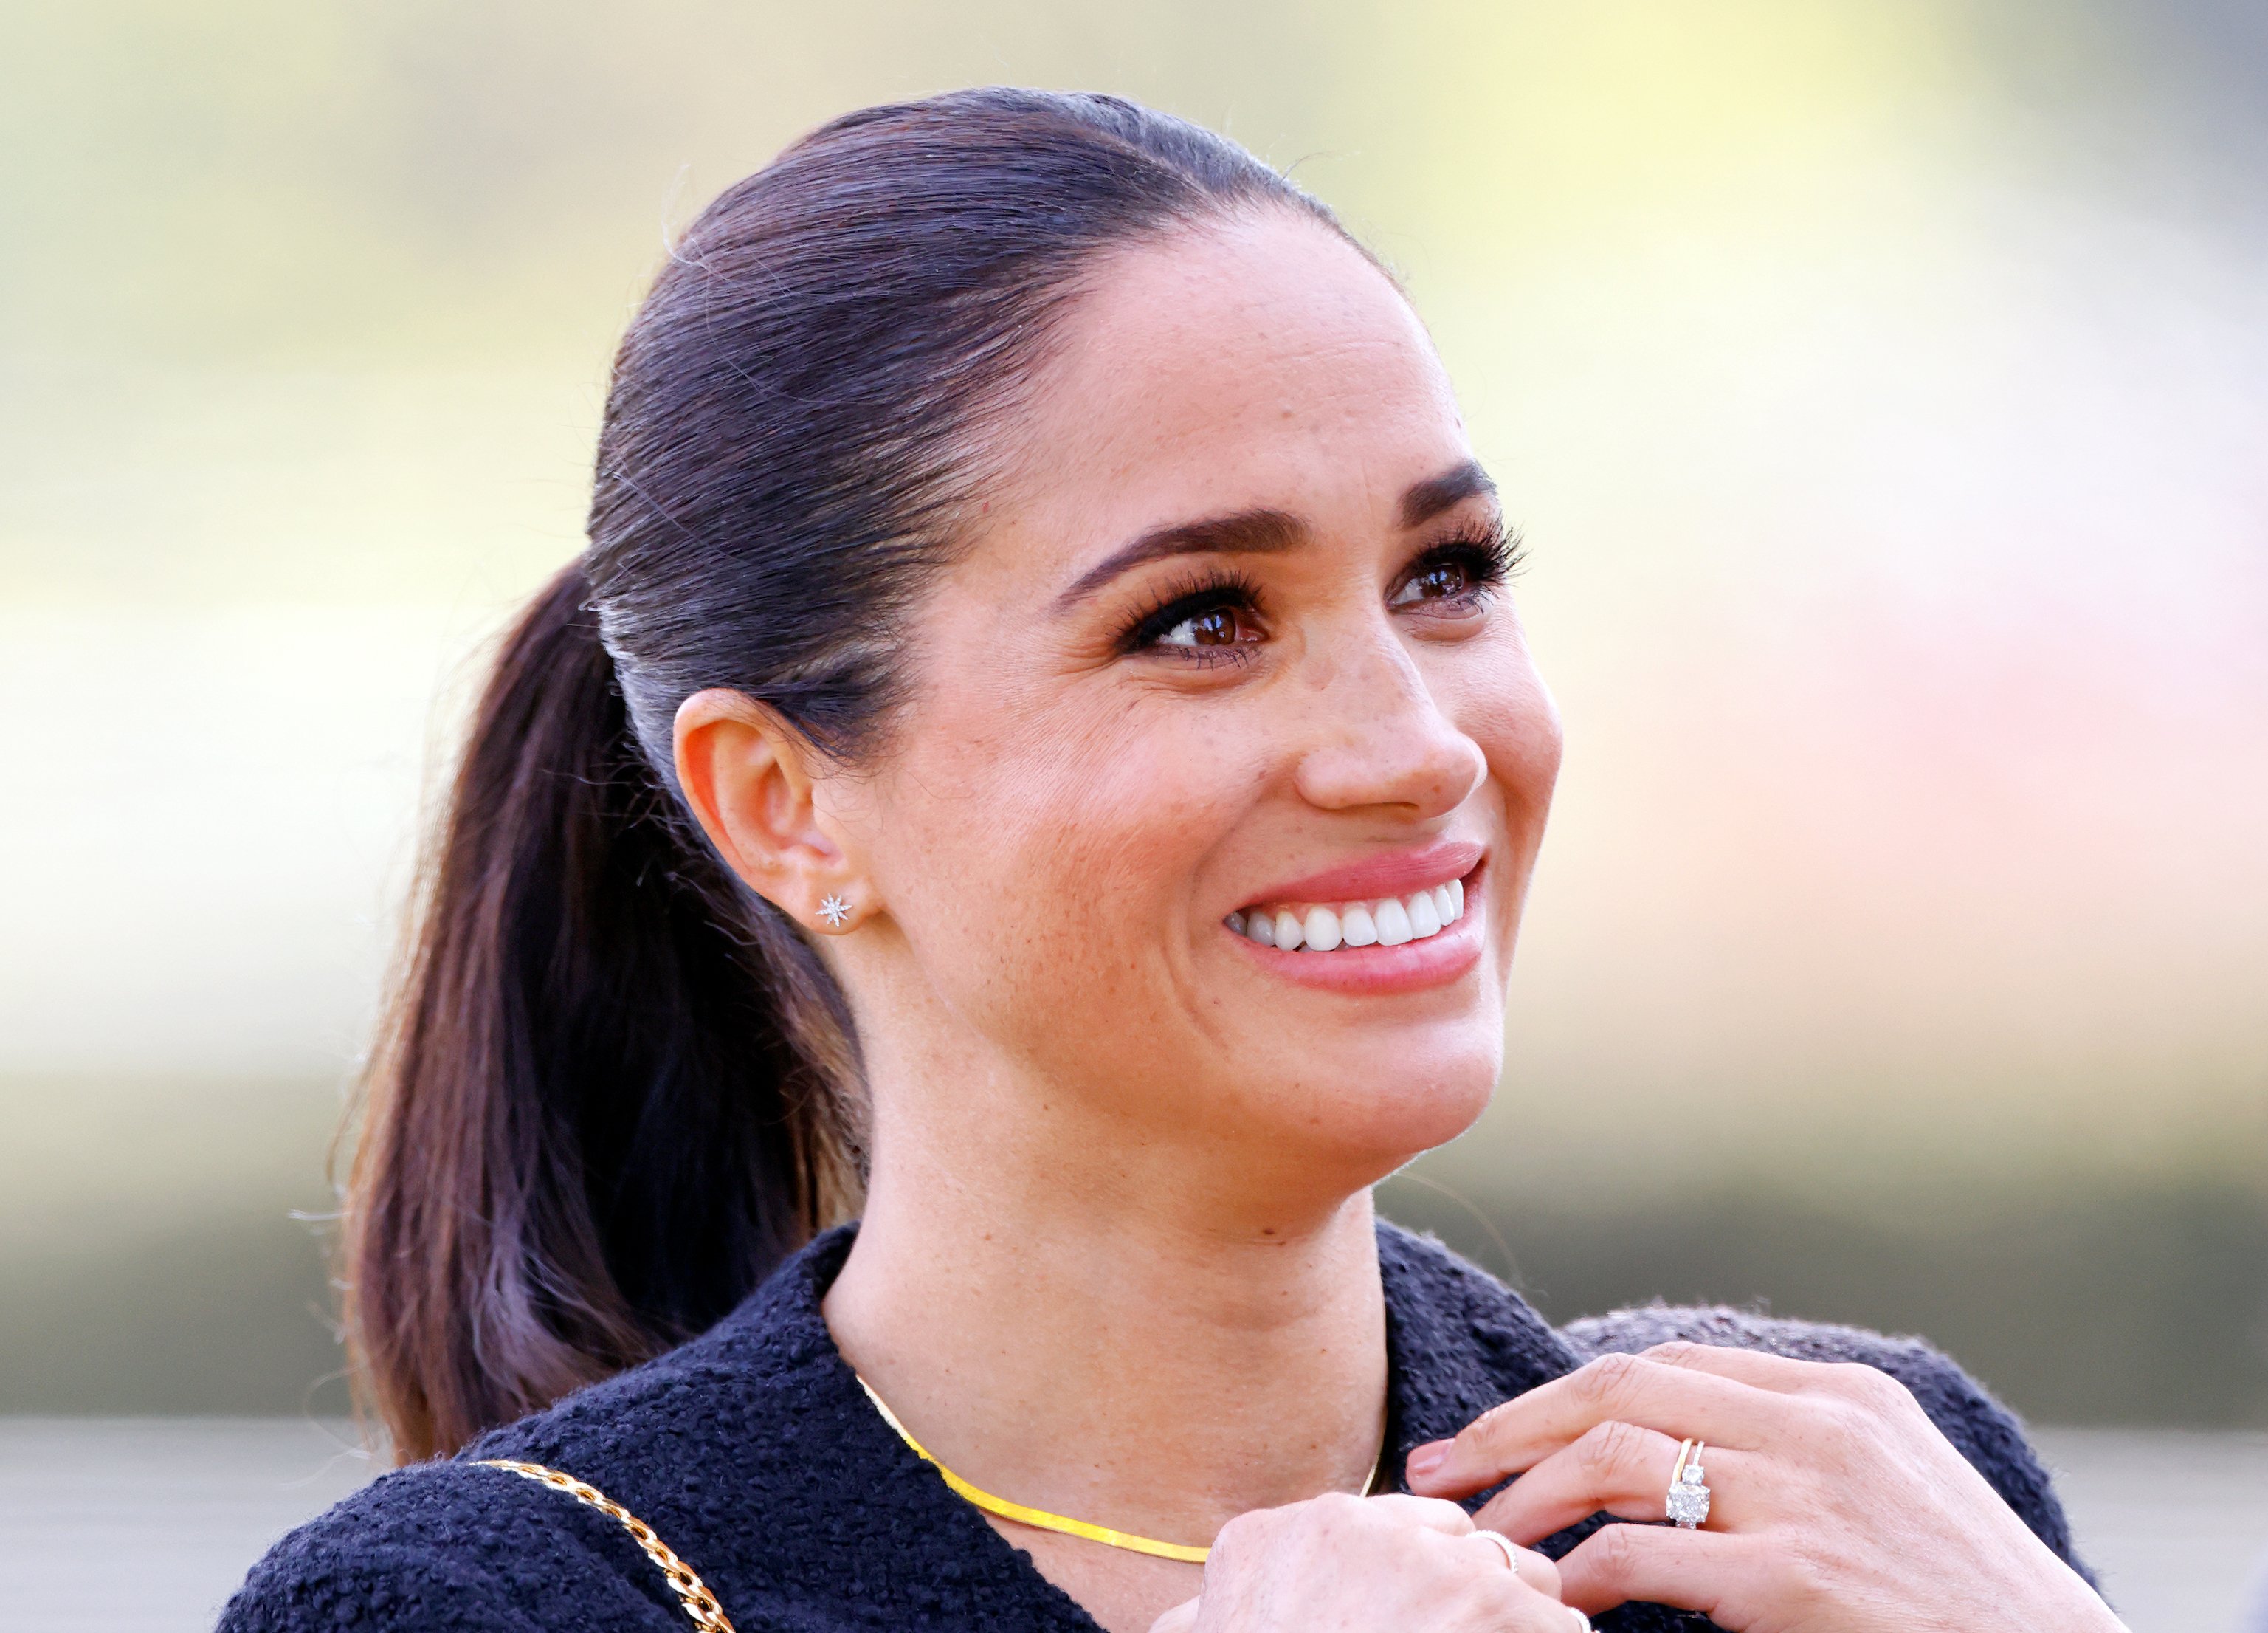 Meghan Markle attends the Land Rover Driving Challenge, on day 1 of the Invictus Games 2020 at Zuiderpark on April 16, 2022 in The Hague, Netherlands ┃Source: Getty Images